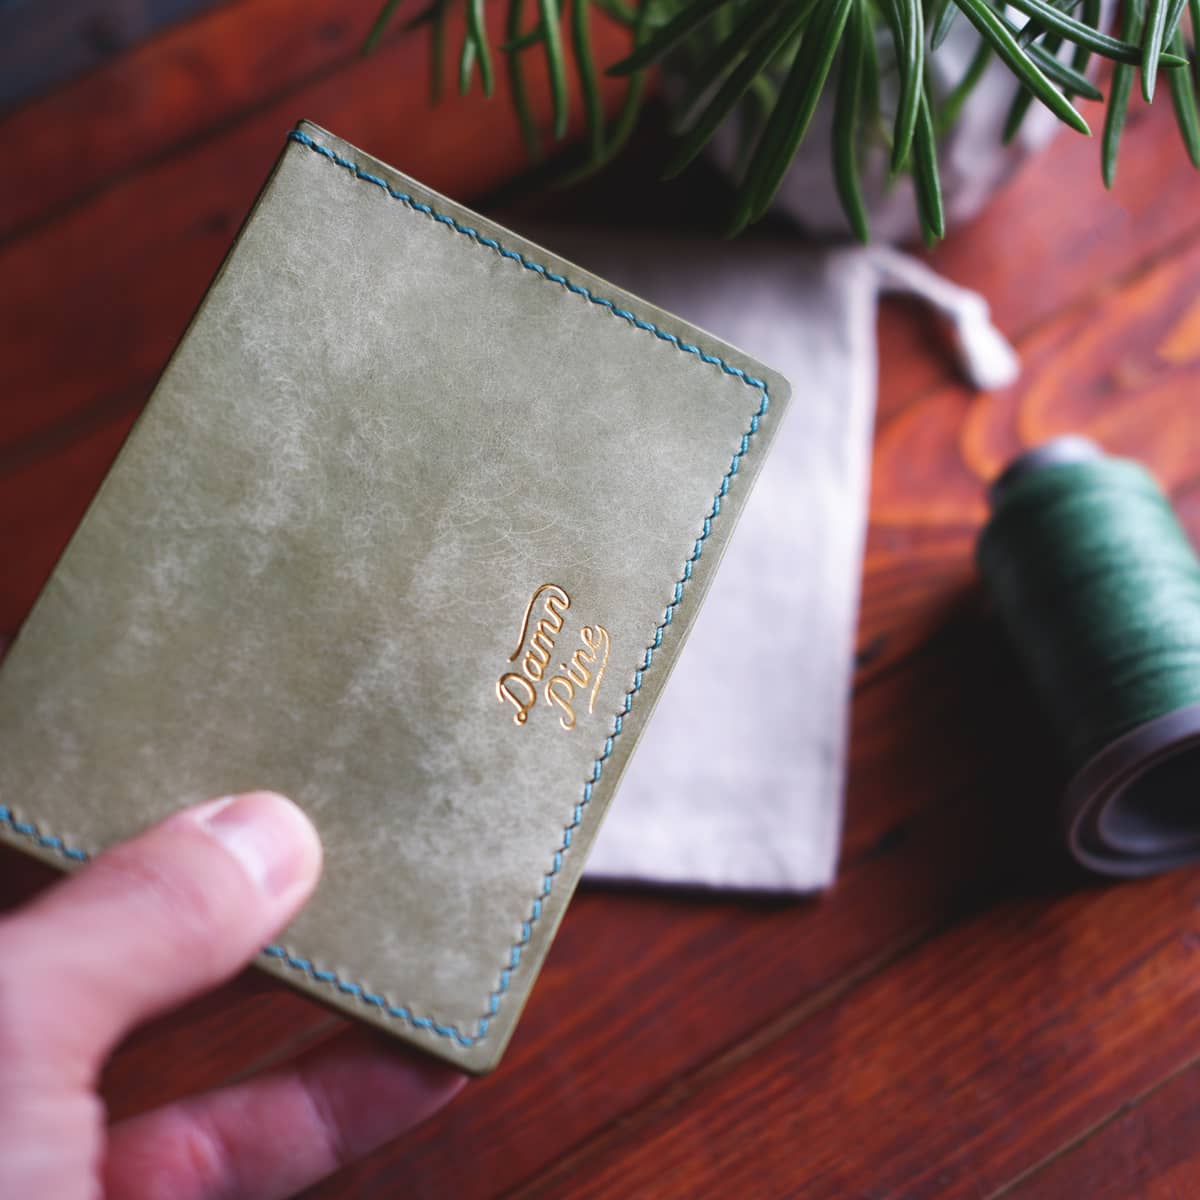 The Executive Card Wallet in Salvia Maya full grain vegetable tanned leather - back, held in hand